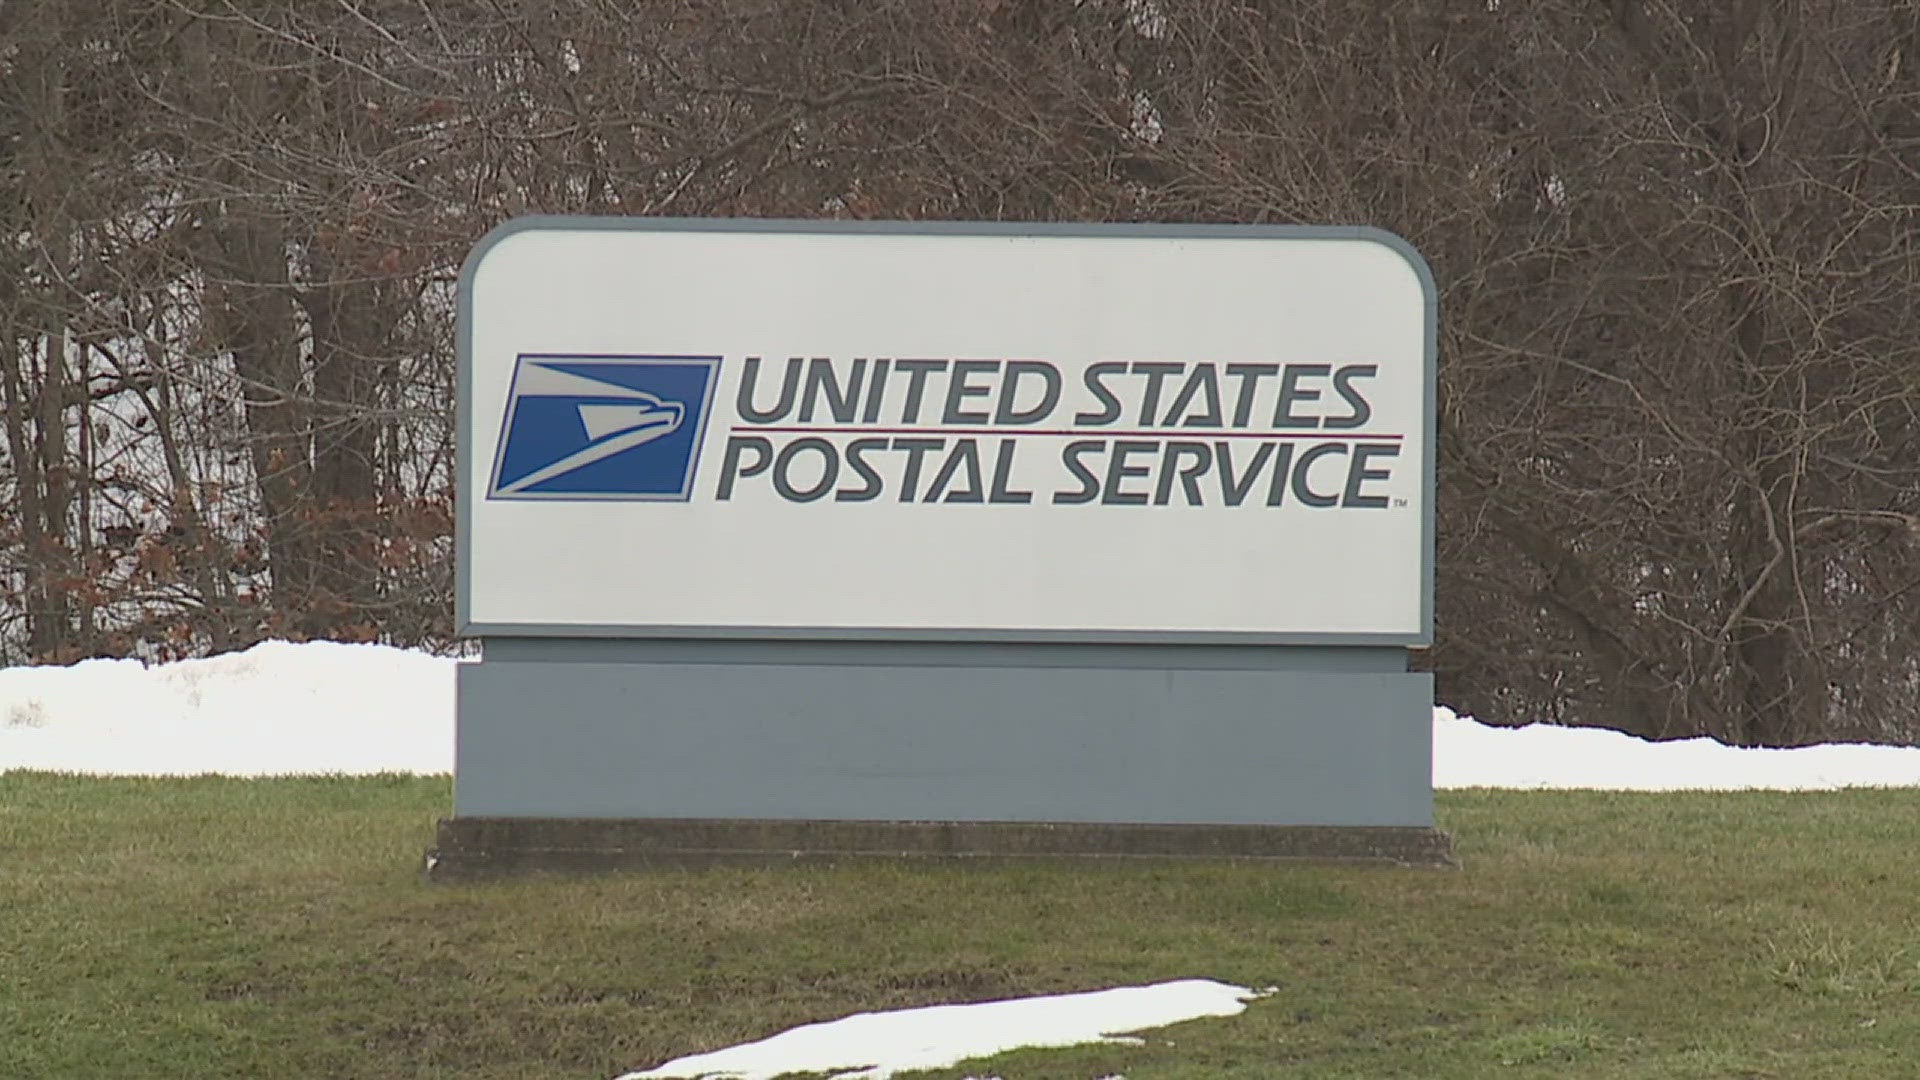 Parts of Atkinson are under a boil order, and the USPS is halting some operations in Milan as the company switches over to larger delivery rooms.